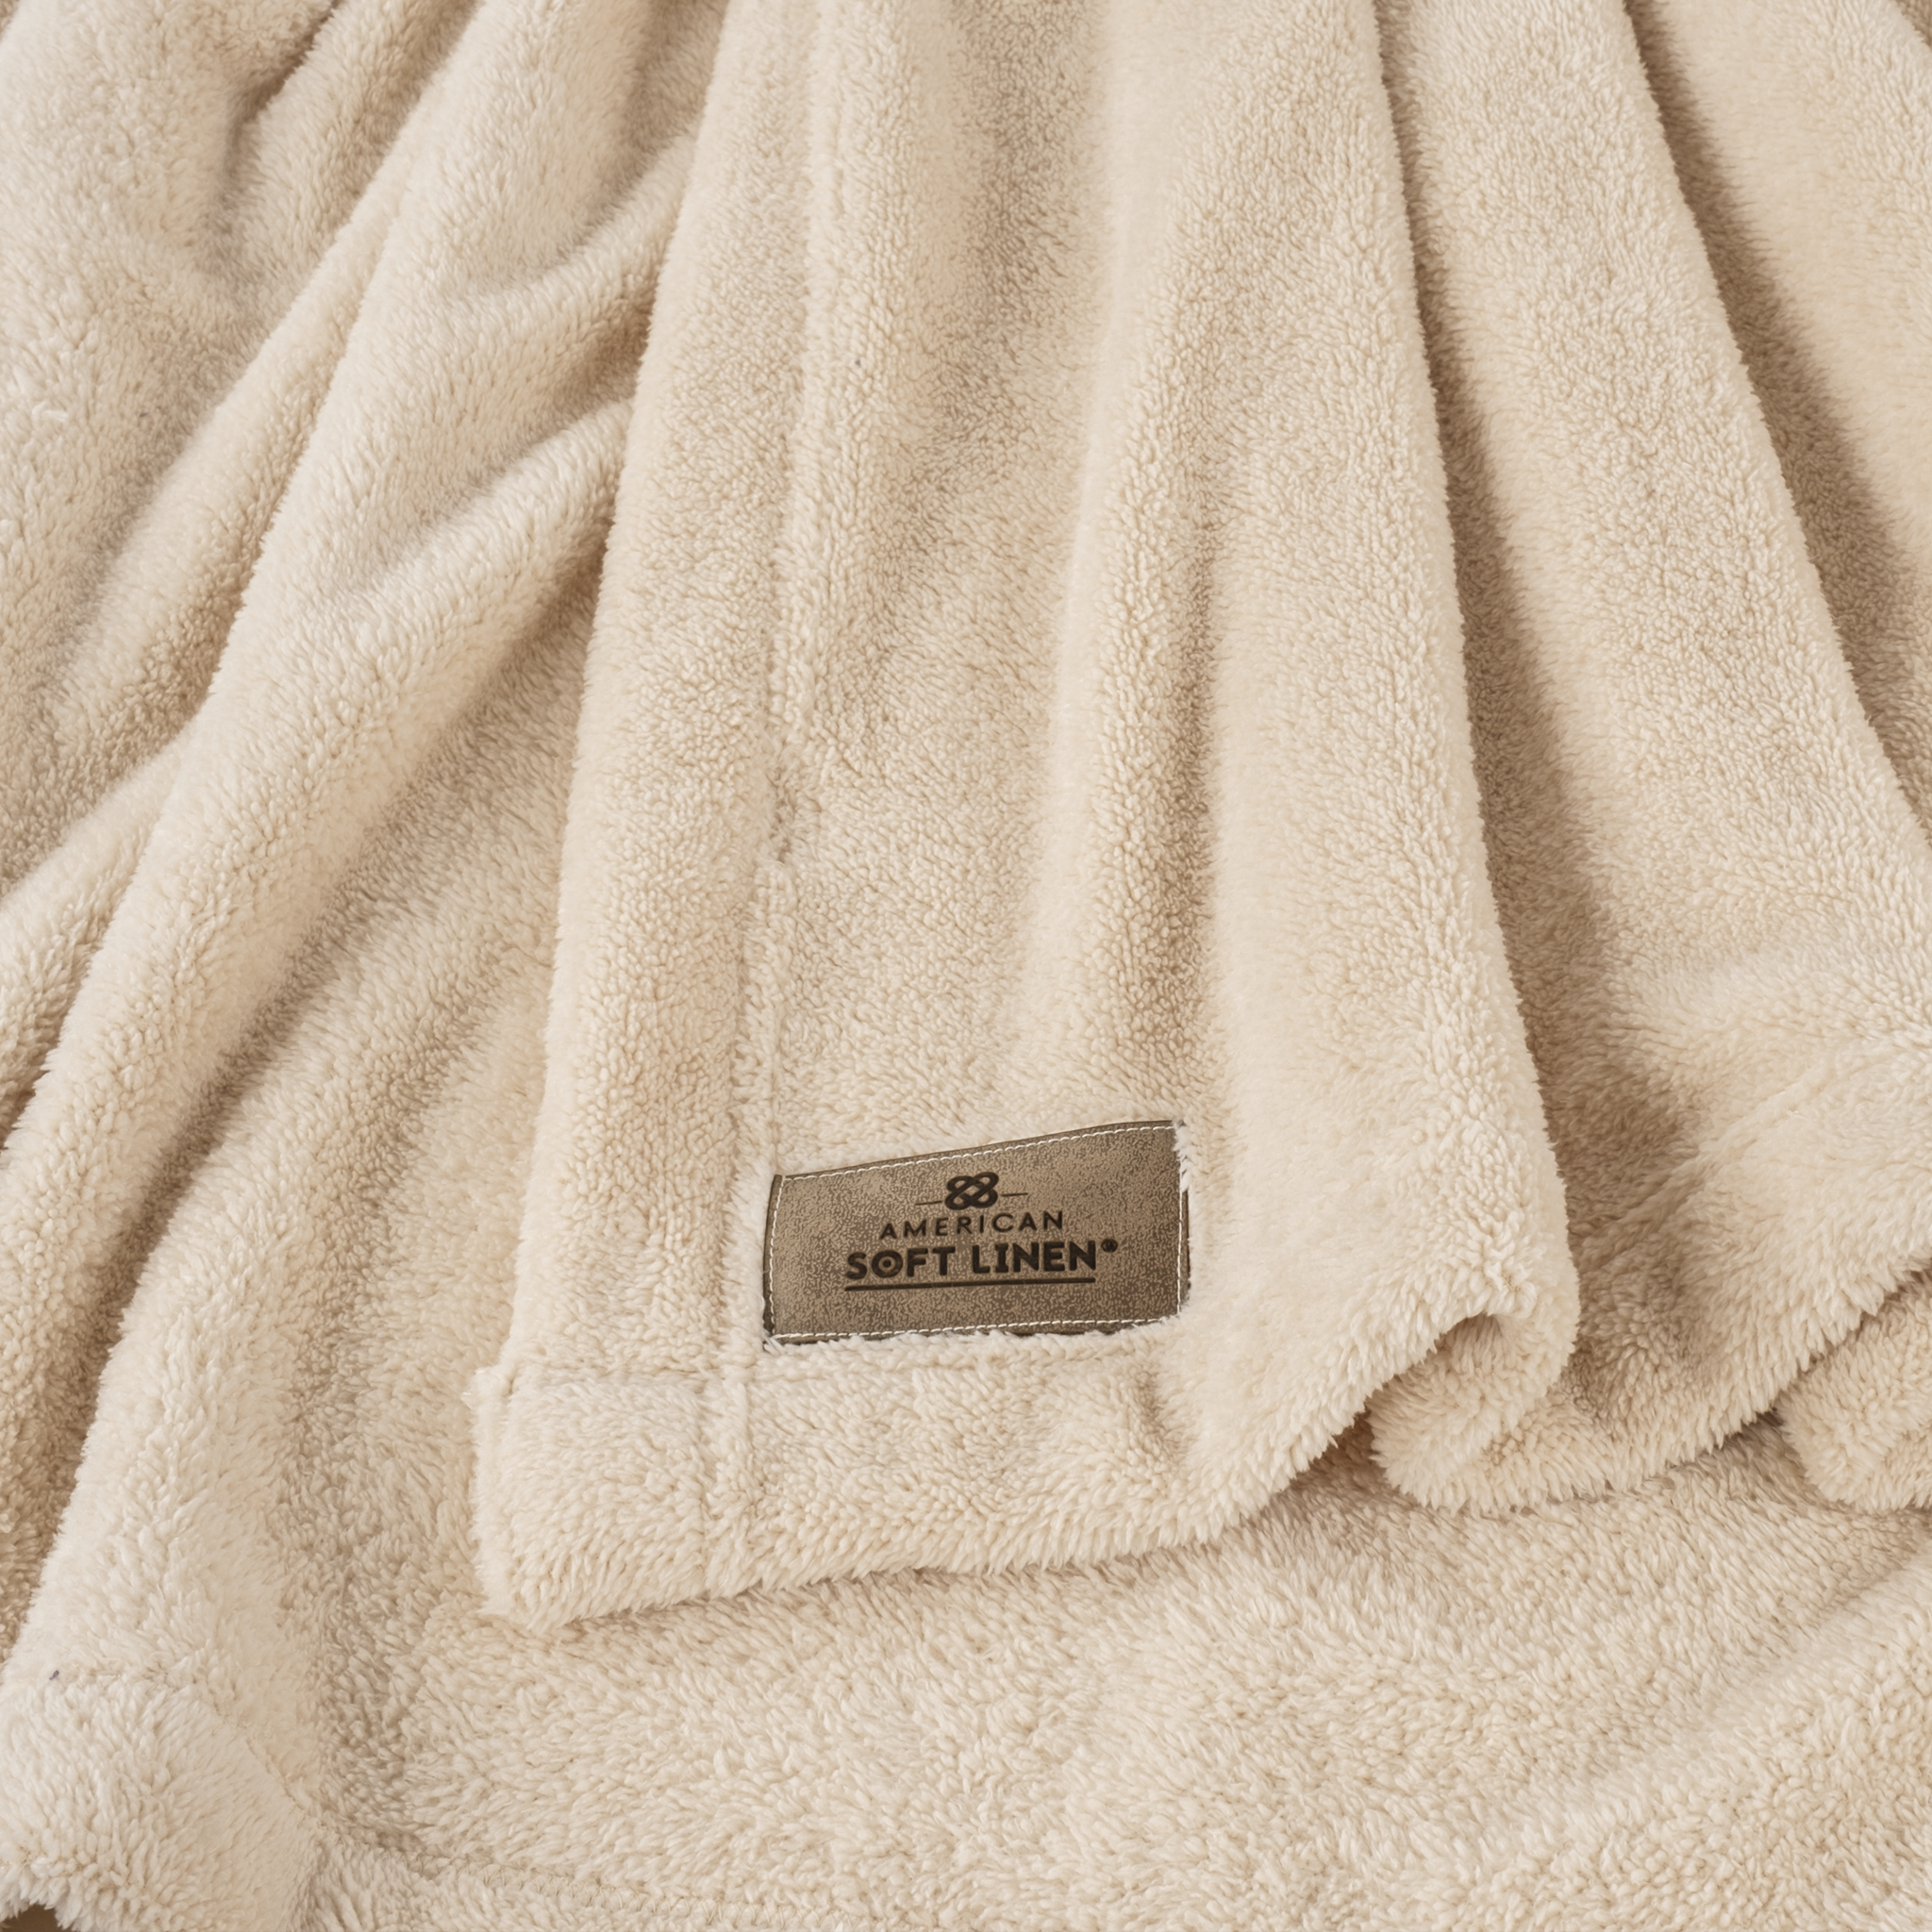 American Soft Linen - Bedding Fleece Blanket - Queen Size 85x90 inches - Sand-Taupe - 4